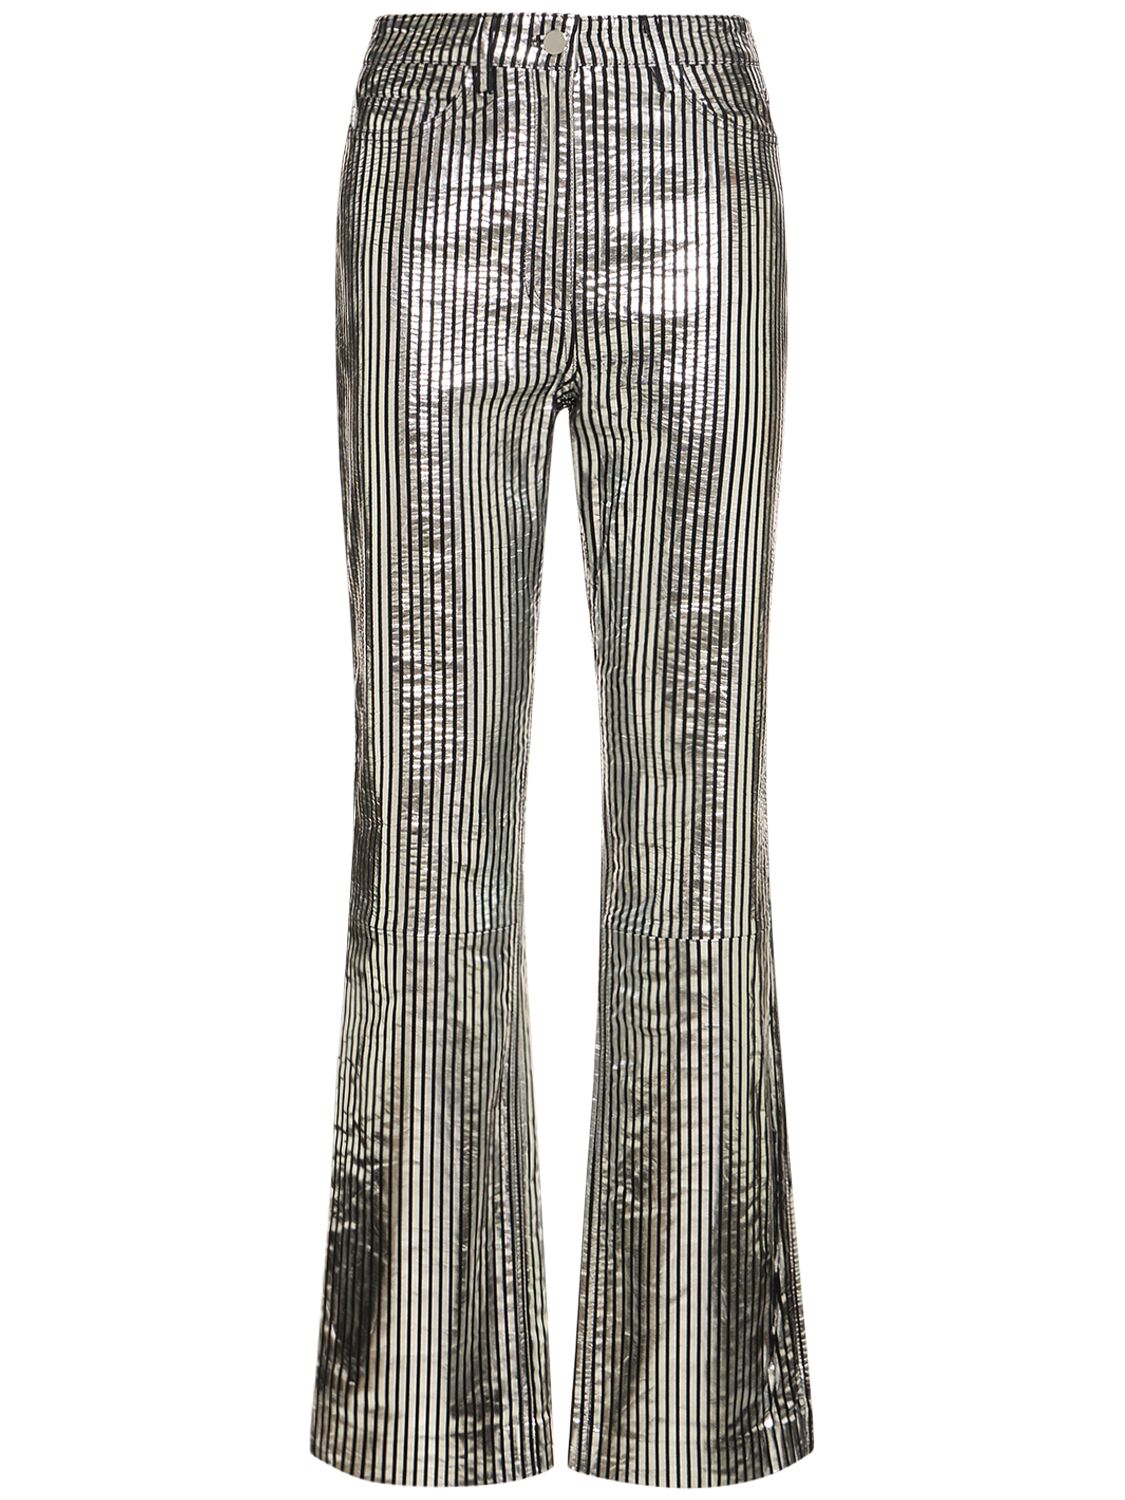 Shop Remain Striped Leather Pants In Black Comb.